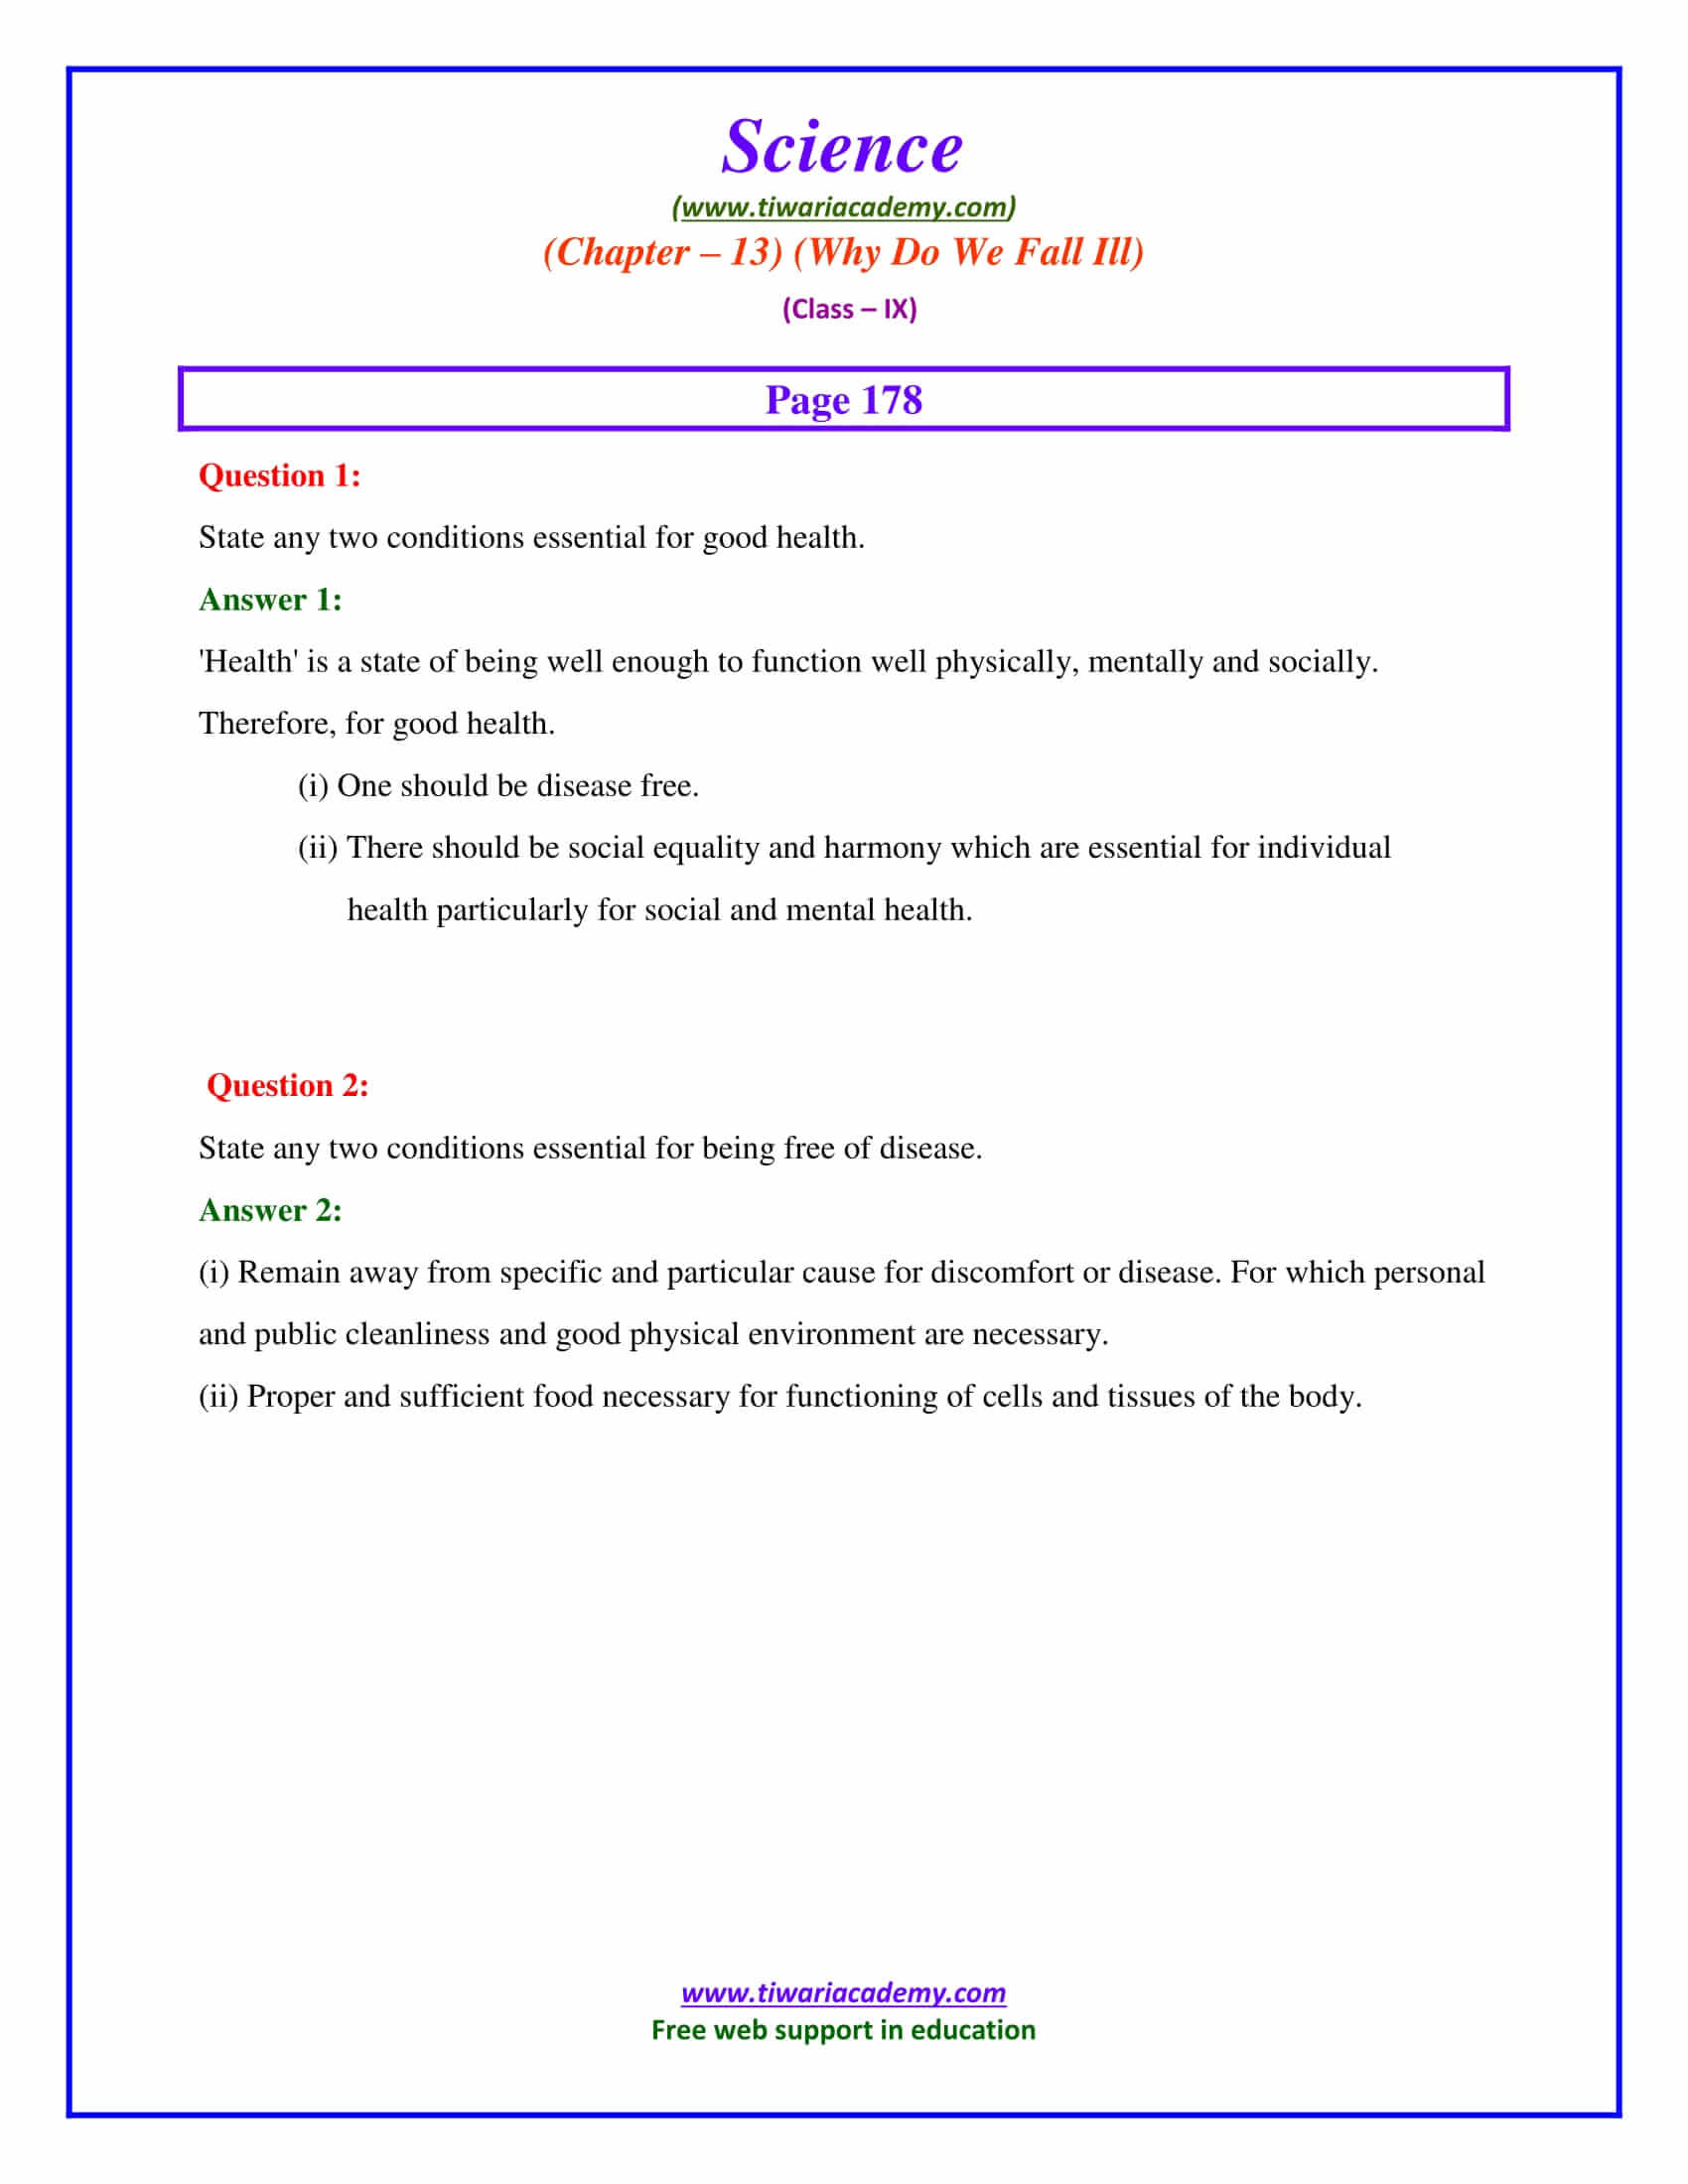 NCERT Solutions for Class 9 Science Chapter 13 Why do we fall ill Intext questions page 178